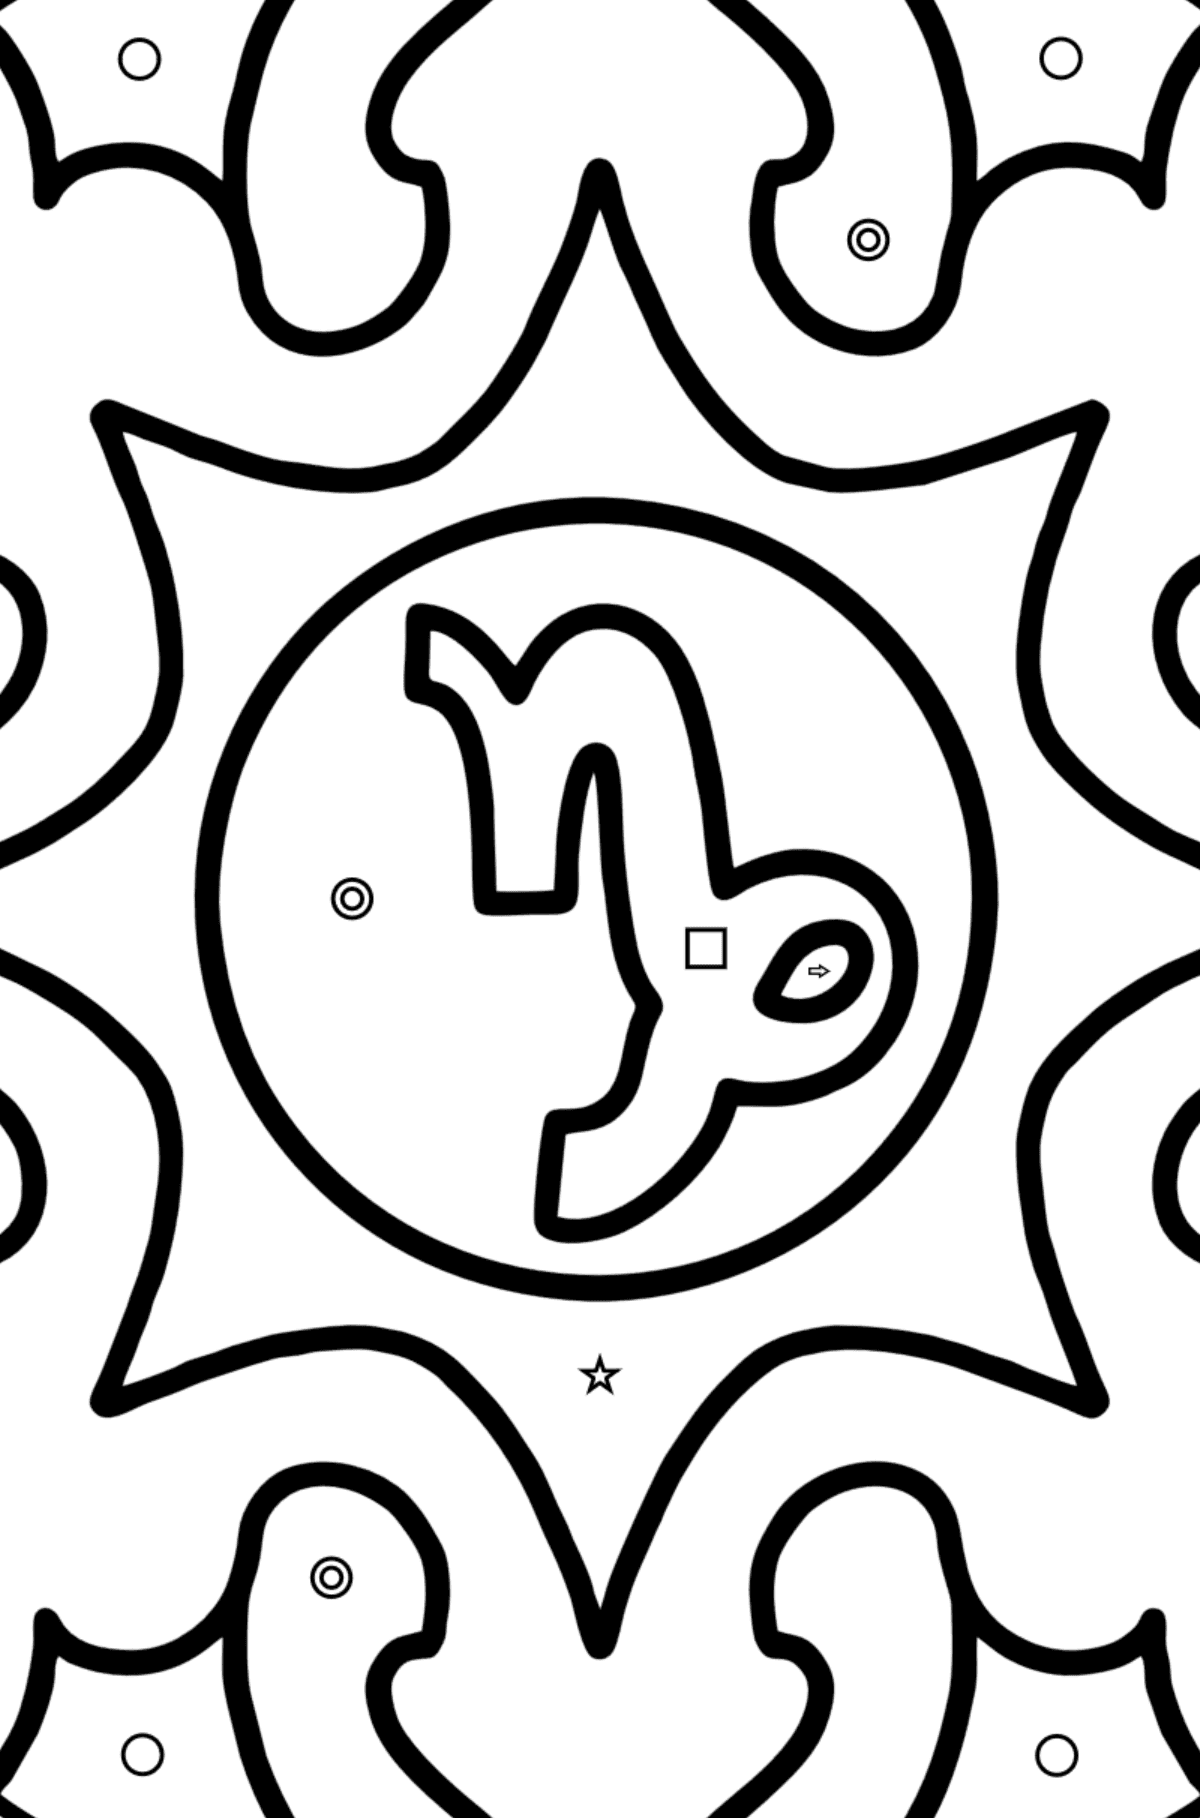 Coloring page - Capricorn zodiac sign - Coloring by Geometric Shapes for Kids